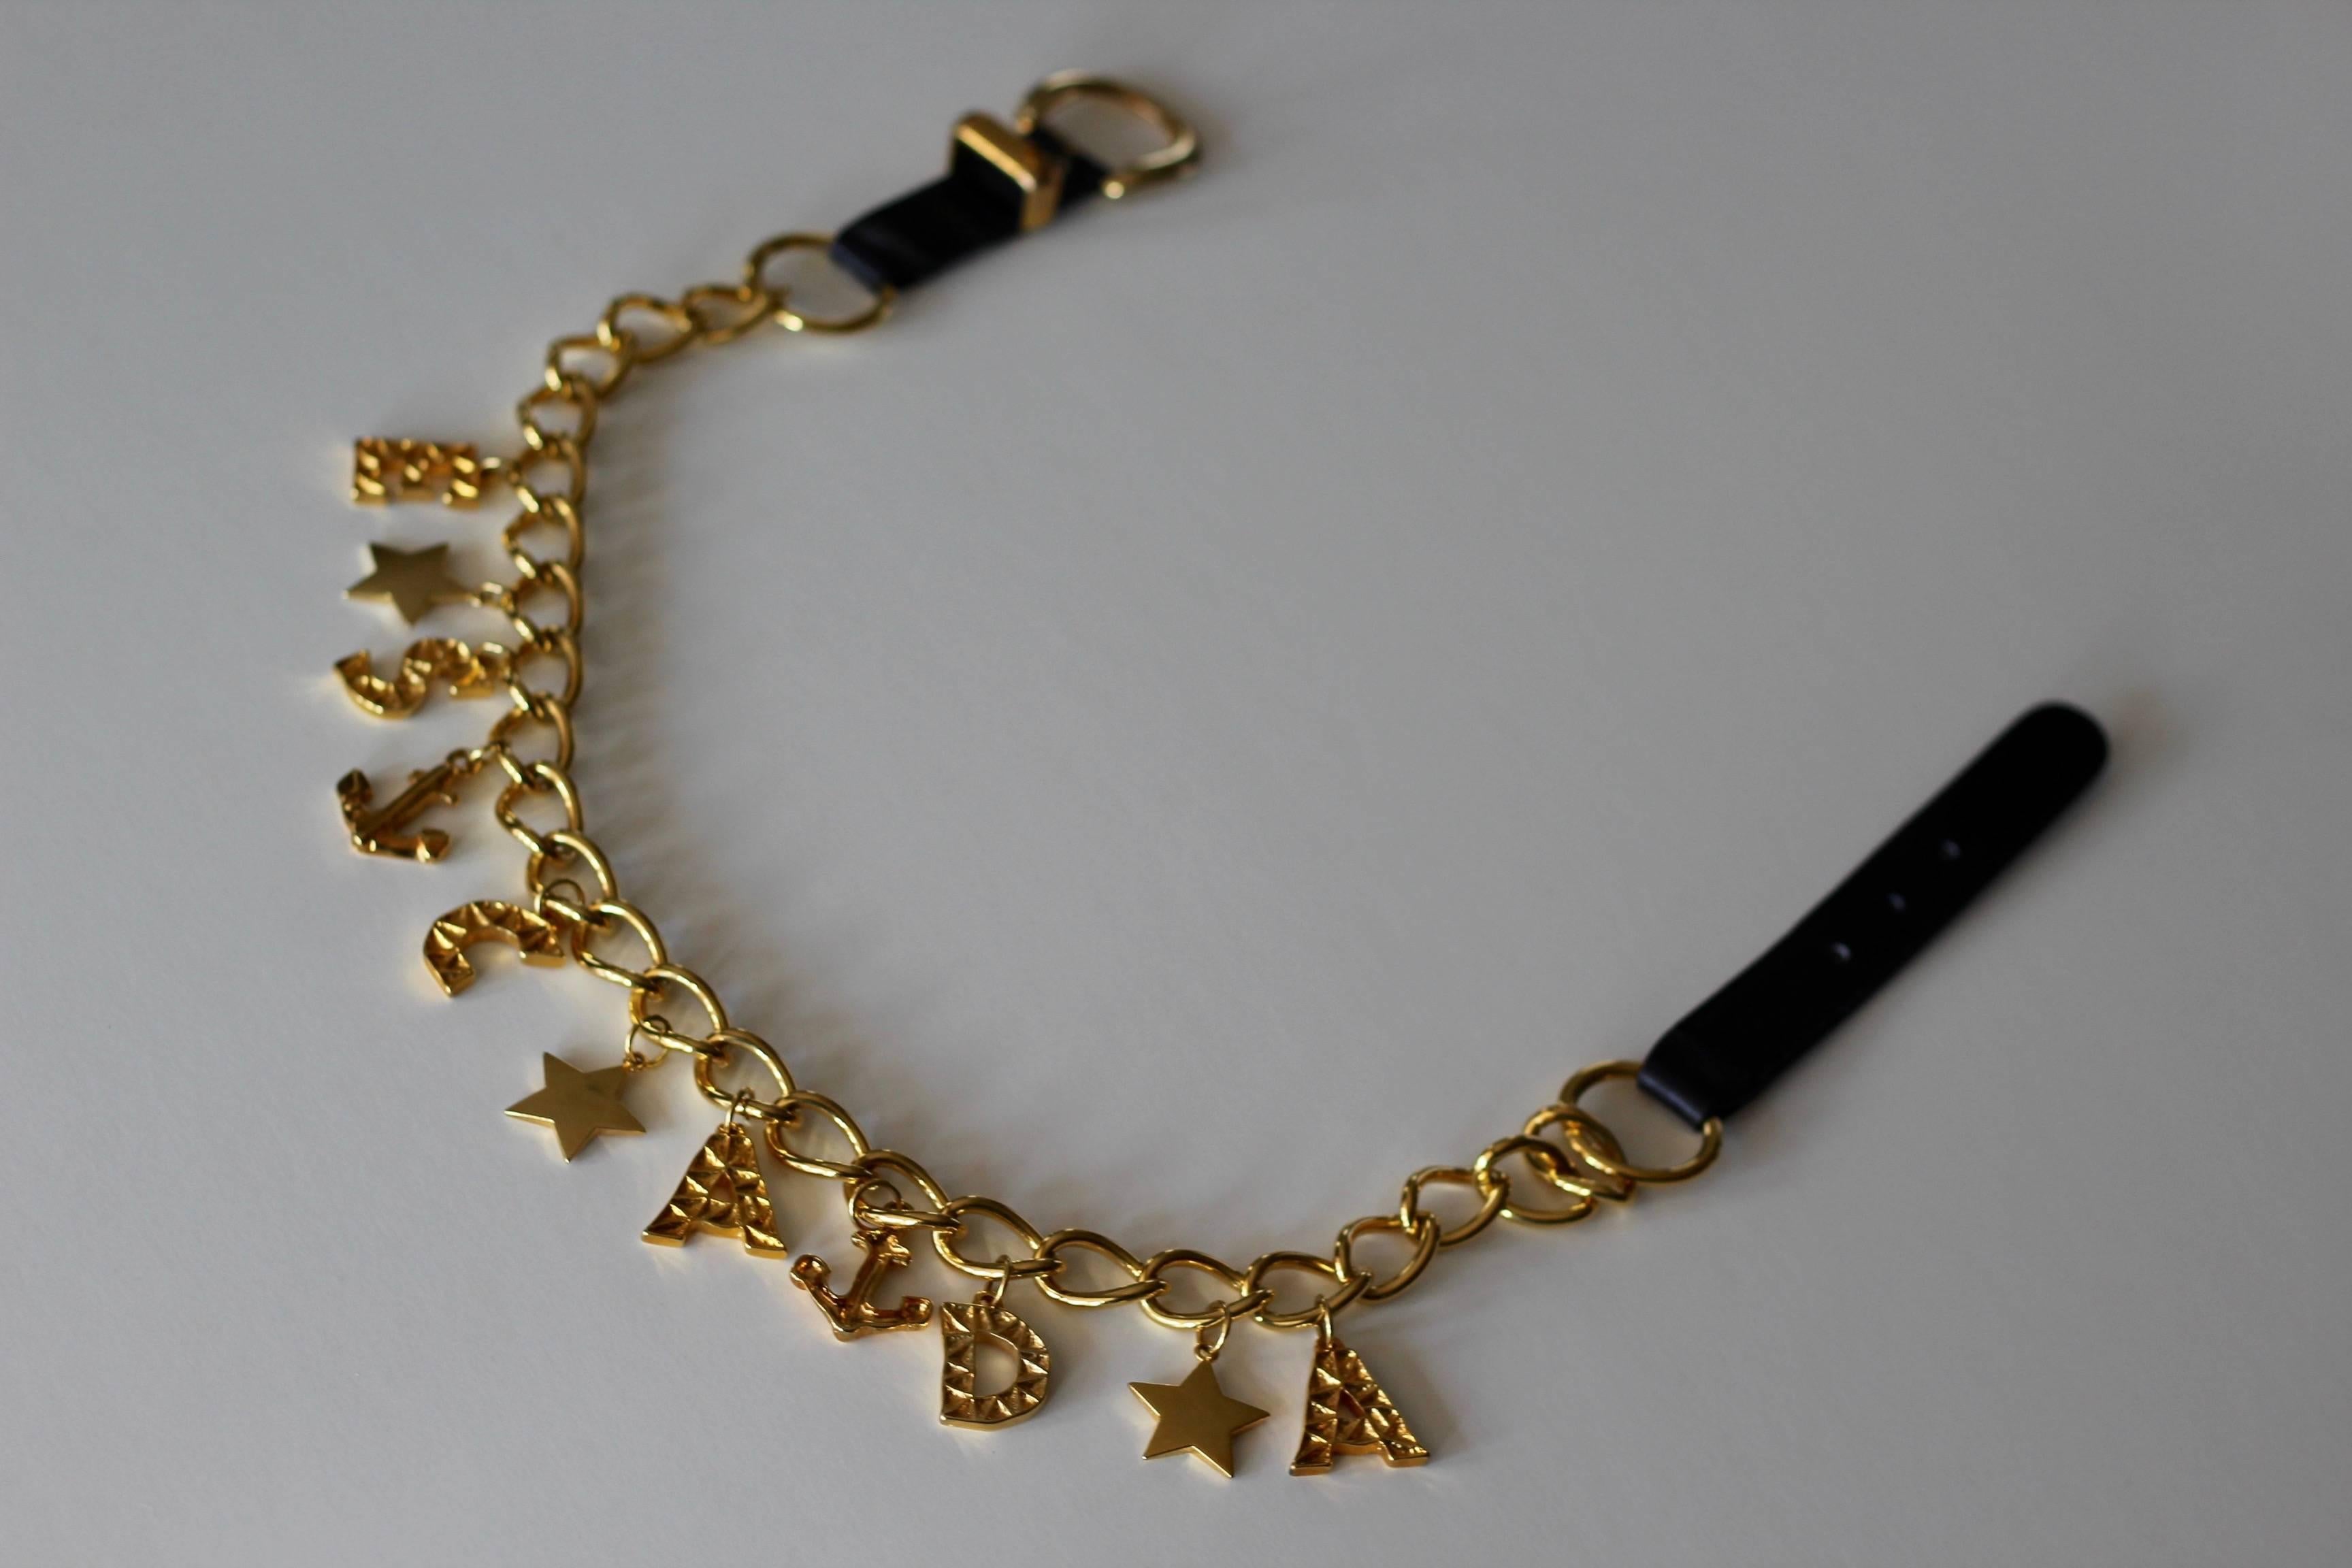 Add some pizazz to your look with this fabulous Escada Gold Chain Link Belt! This monogrammed belt spells out ESCADA and features nautical elements including stars and anchors. Belt features large gold chains and is finished with a black leather